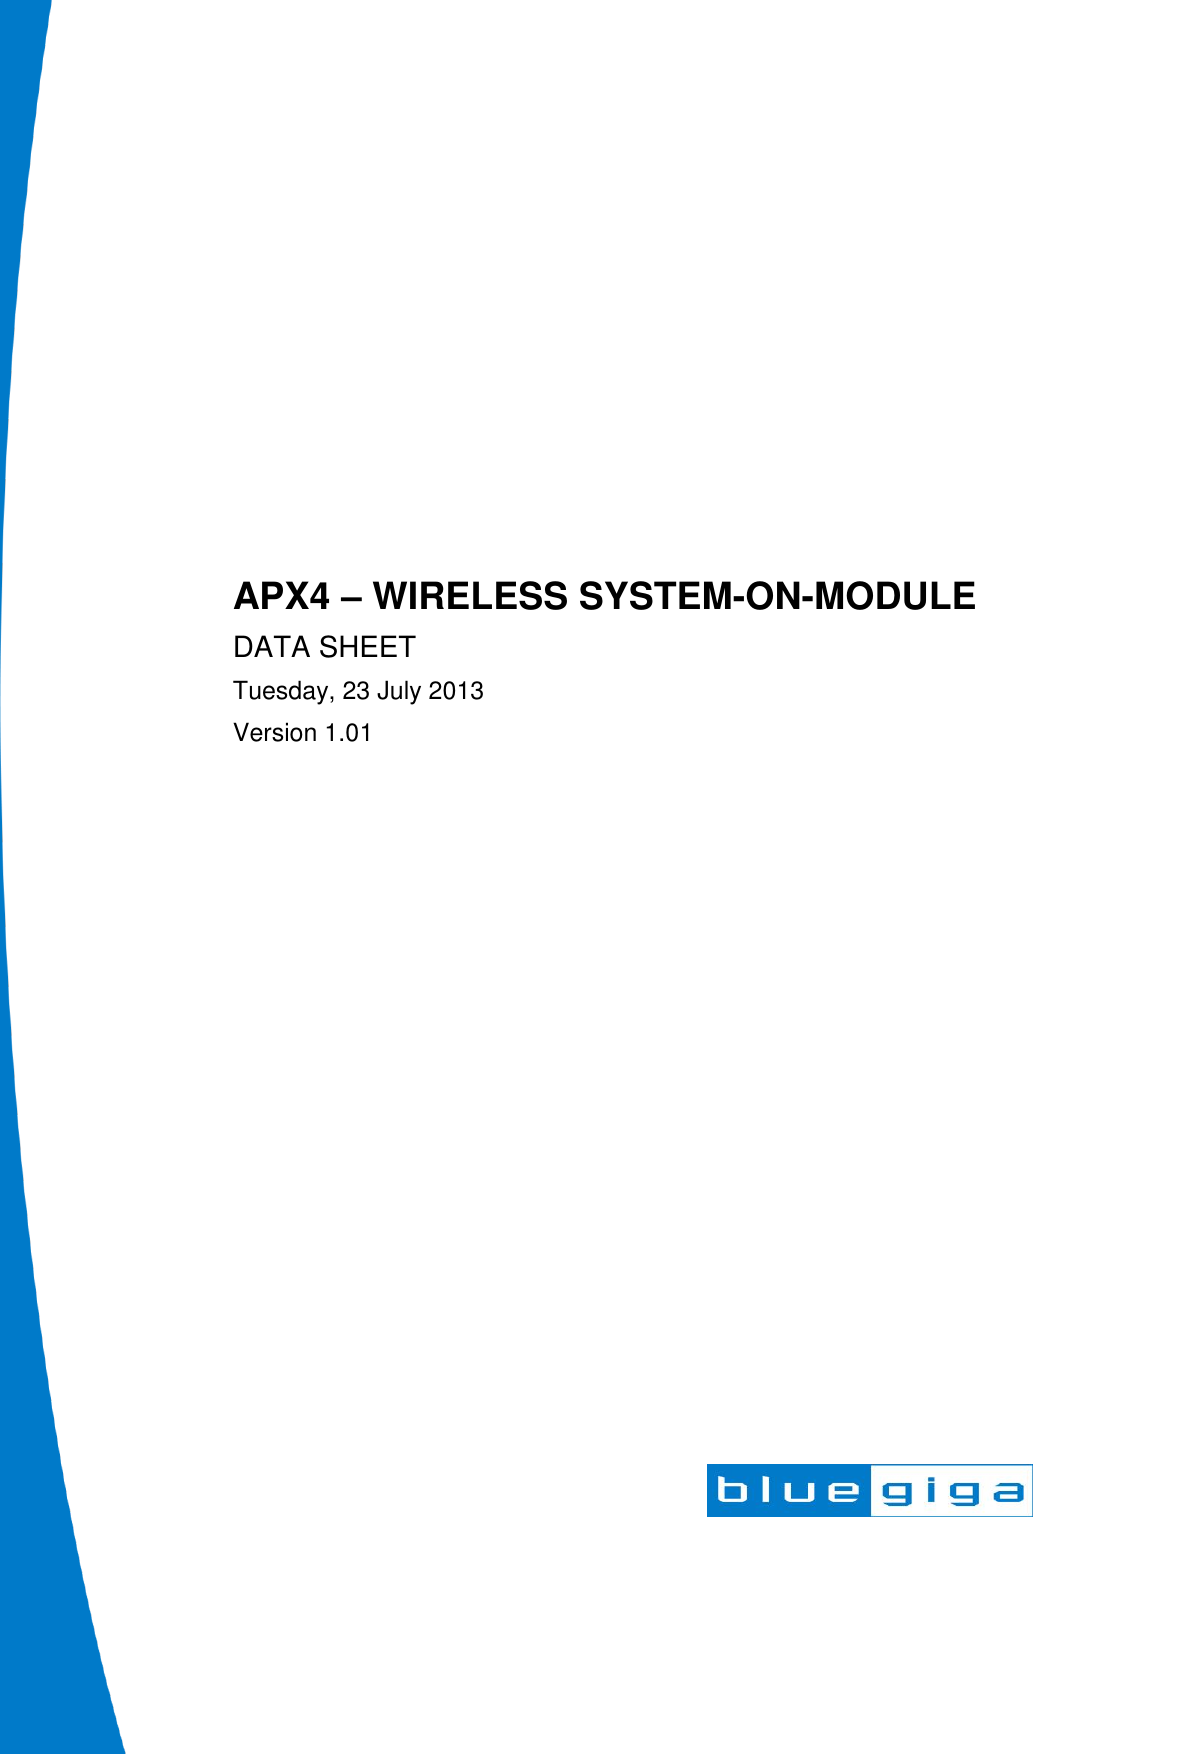                        APX4 – WIRELESS SYSTEM-ON-MODULE DATA SHEET Tuesday, 23 July 2013 Version 1.01  